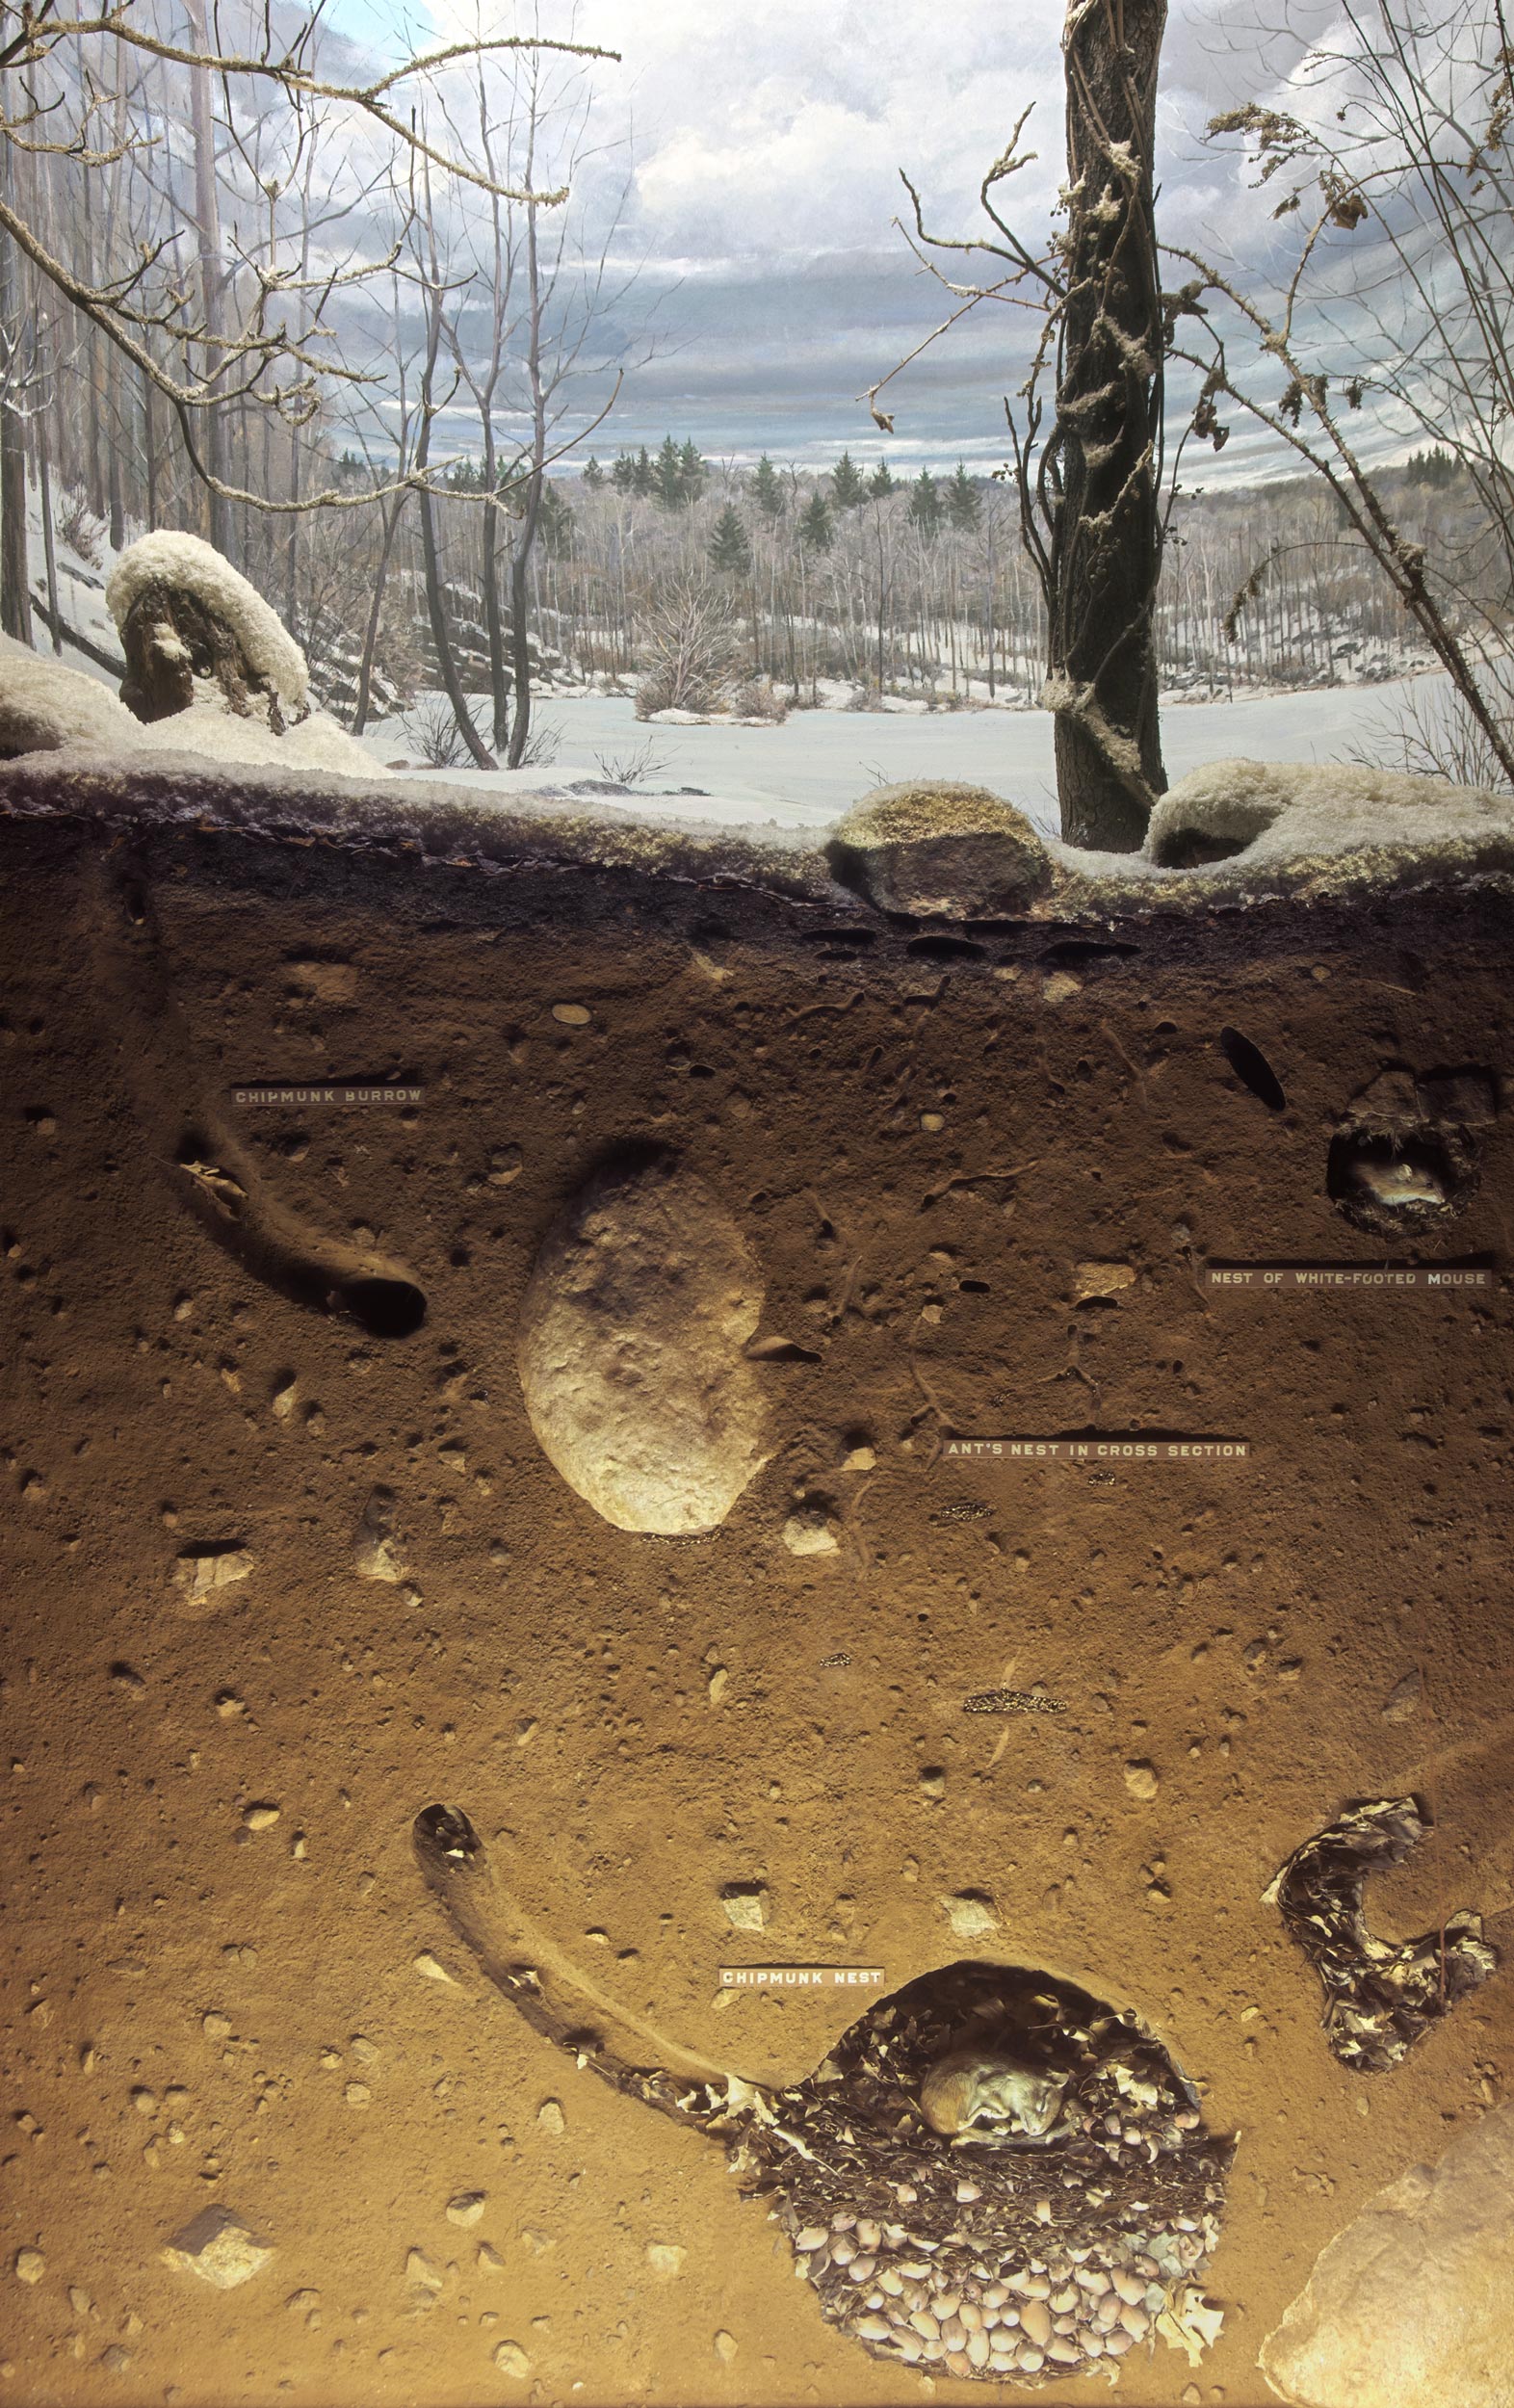 Diorama showing the landscape and cross section of the soil of the woodland during the winter season.